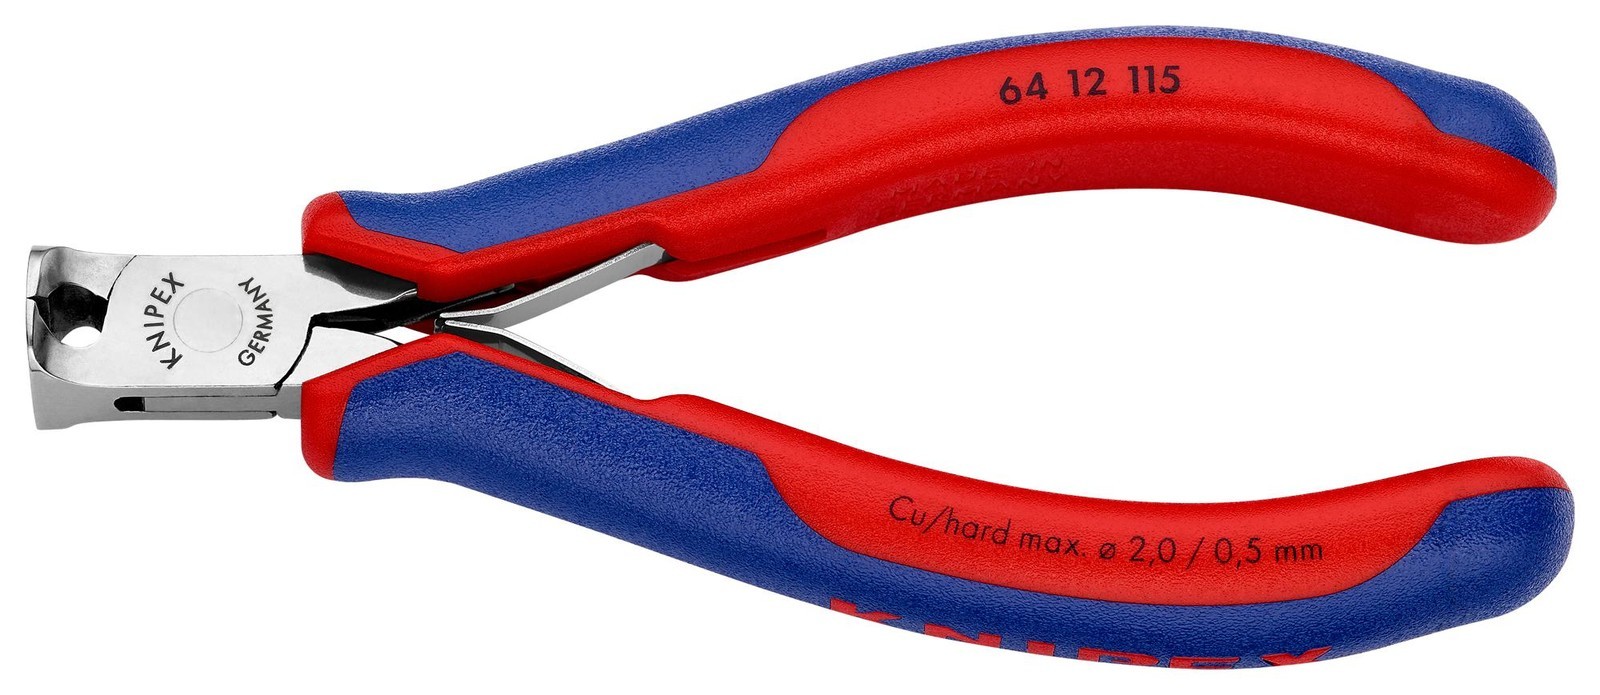 Knipex 64 12 115 End Cutting NIppers